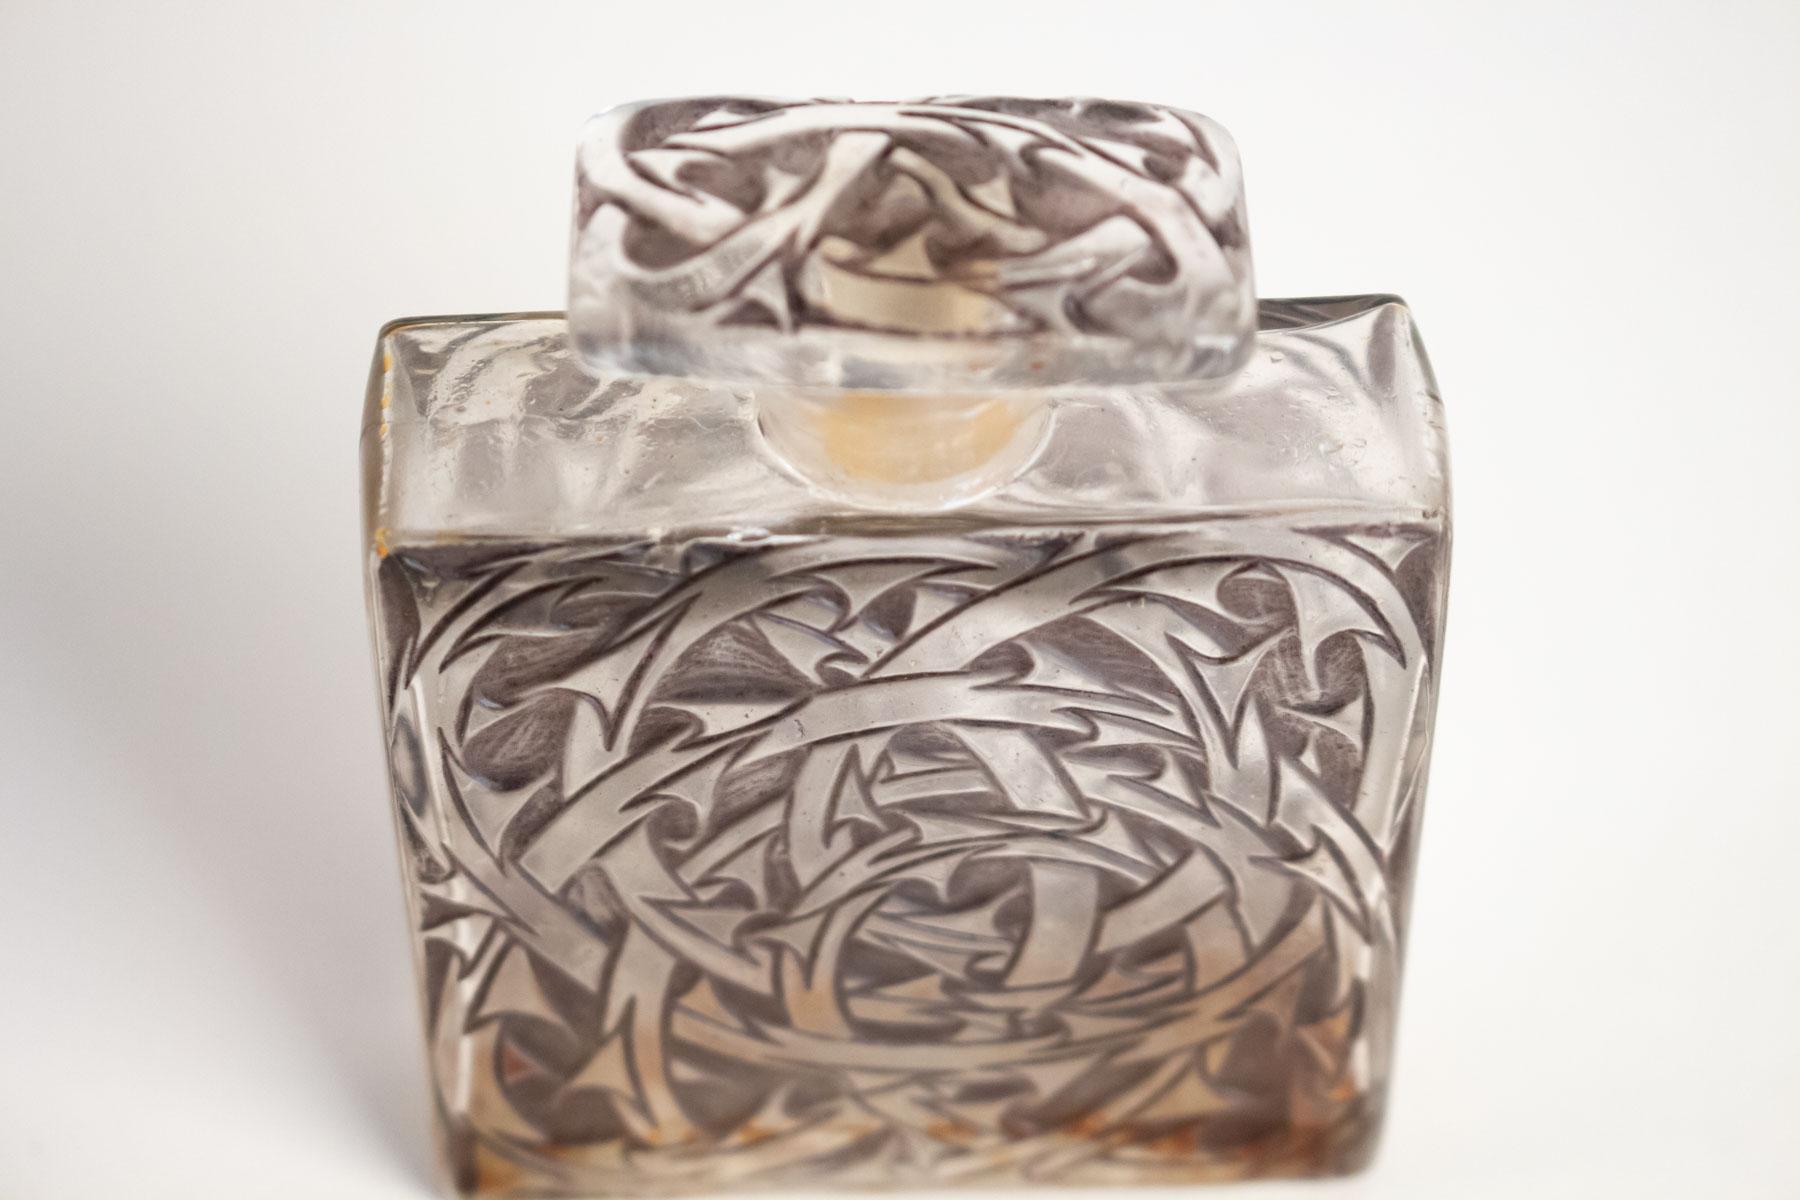 Rene Lalique Perfume Bottle Entrelacs:
Model: Volnay-Perfume-7, circa 1921.
Glass container under a rectangular stopper with both parts decorated with a molded briar pattern
8.5 centimeters tall with matching vine design all-over the body and